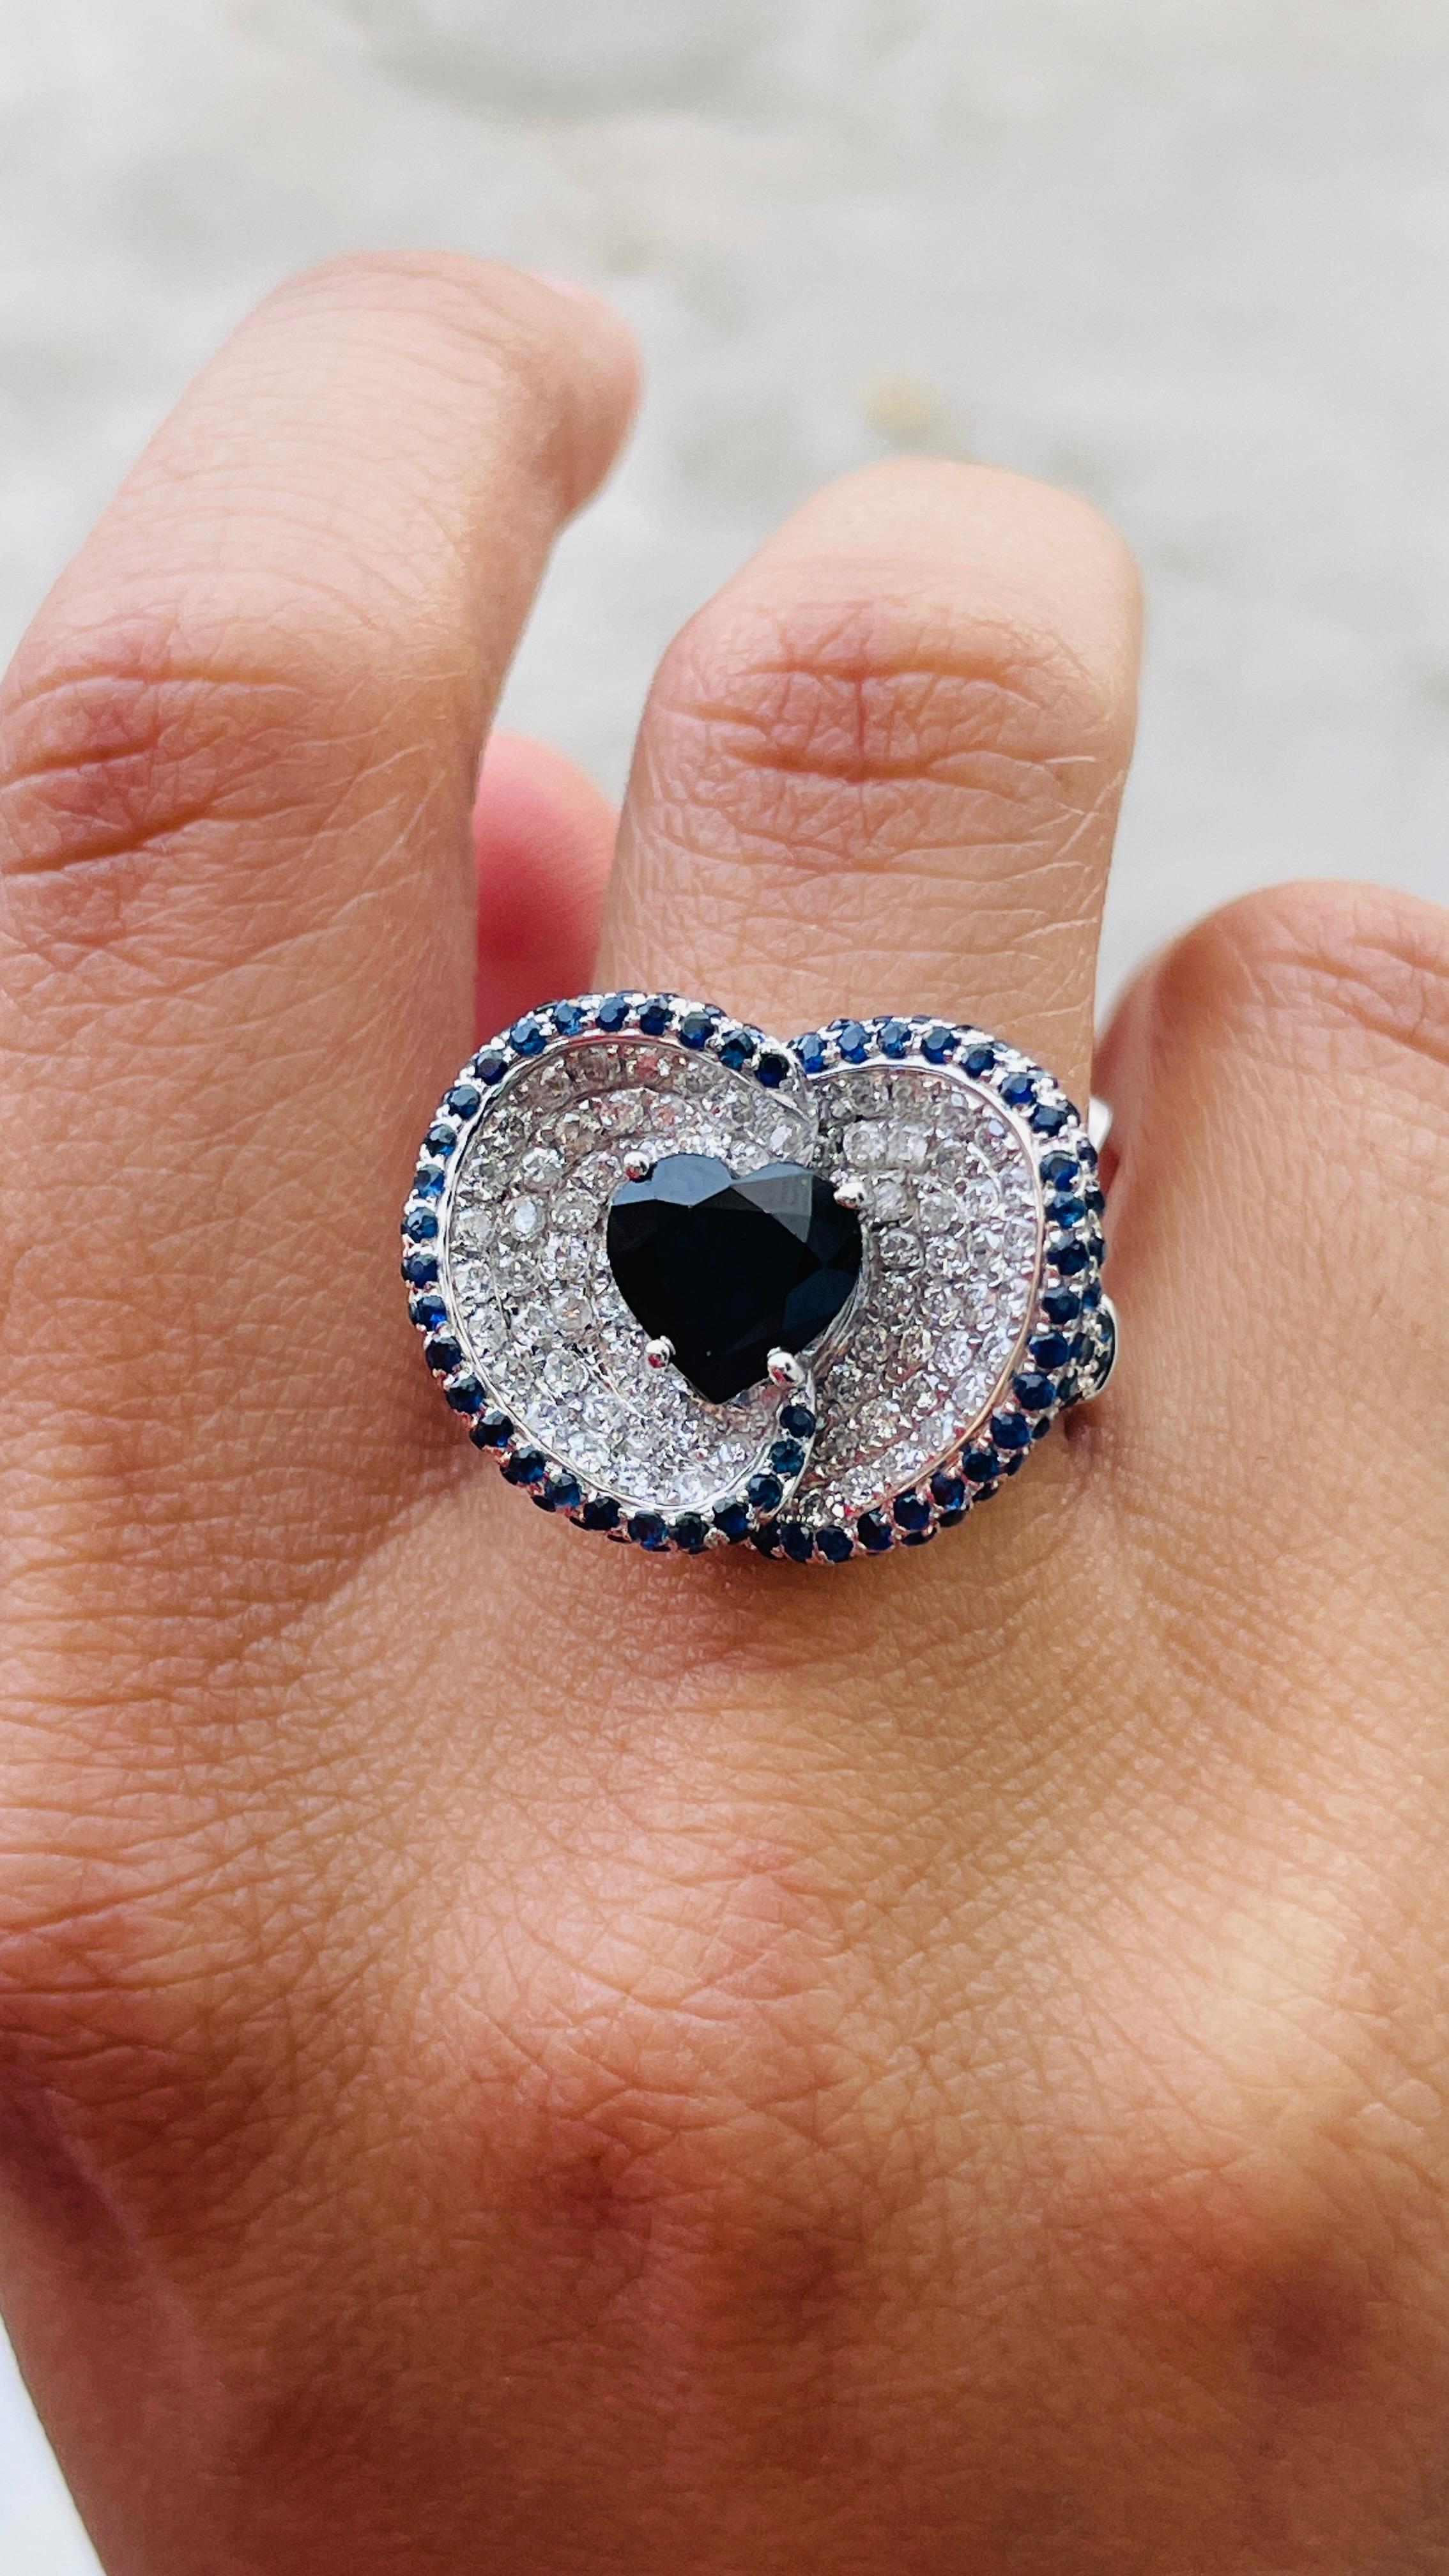 For Sale:  3.35 Carat Heart Cut Blue Sapphire and Diamond Unique Ring in 14K White Gold 5